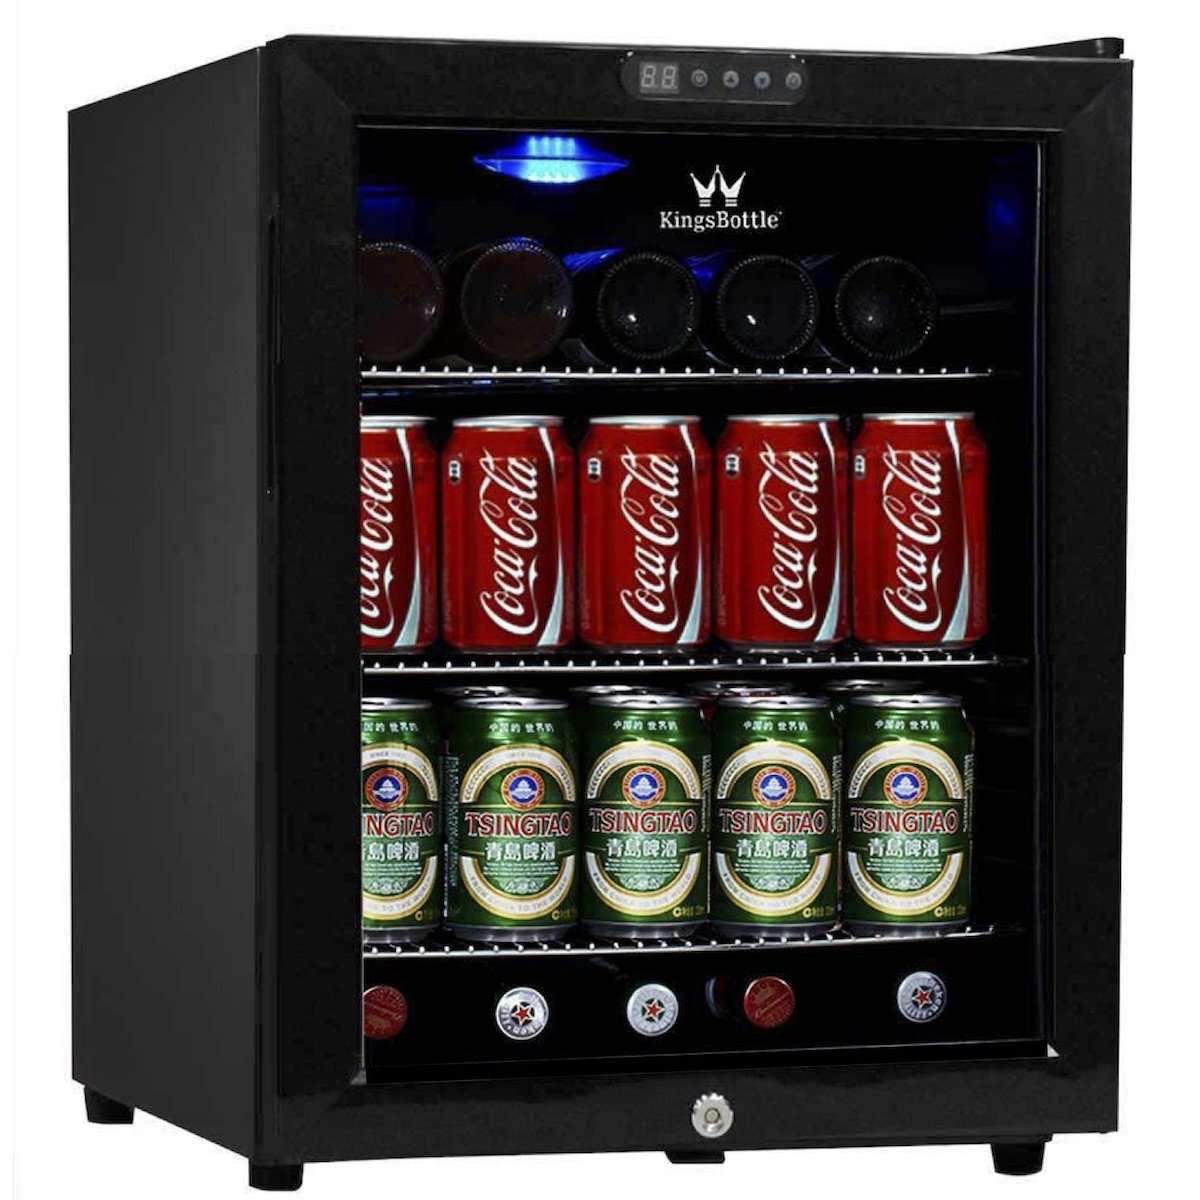 6 Important Things to Consider When Buying a Mini Fridge - Foter